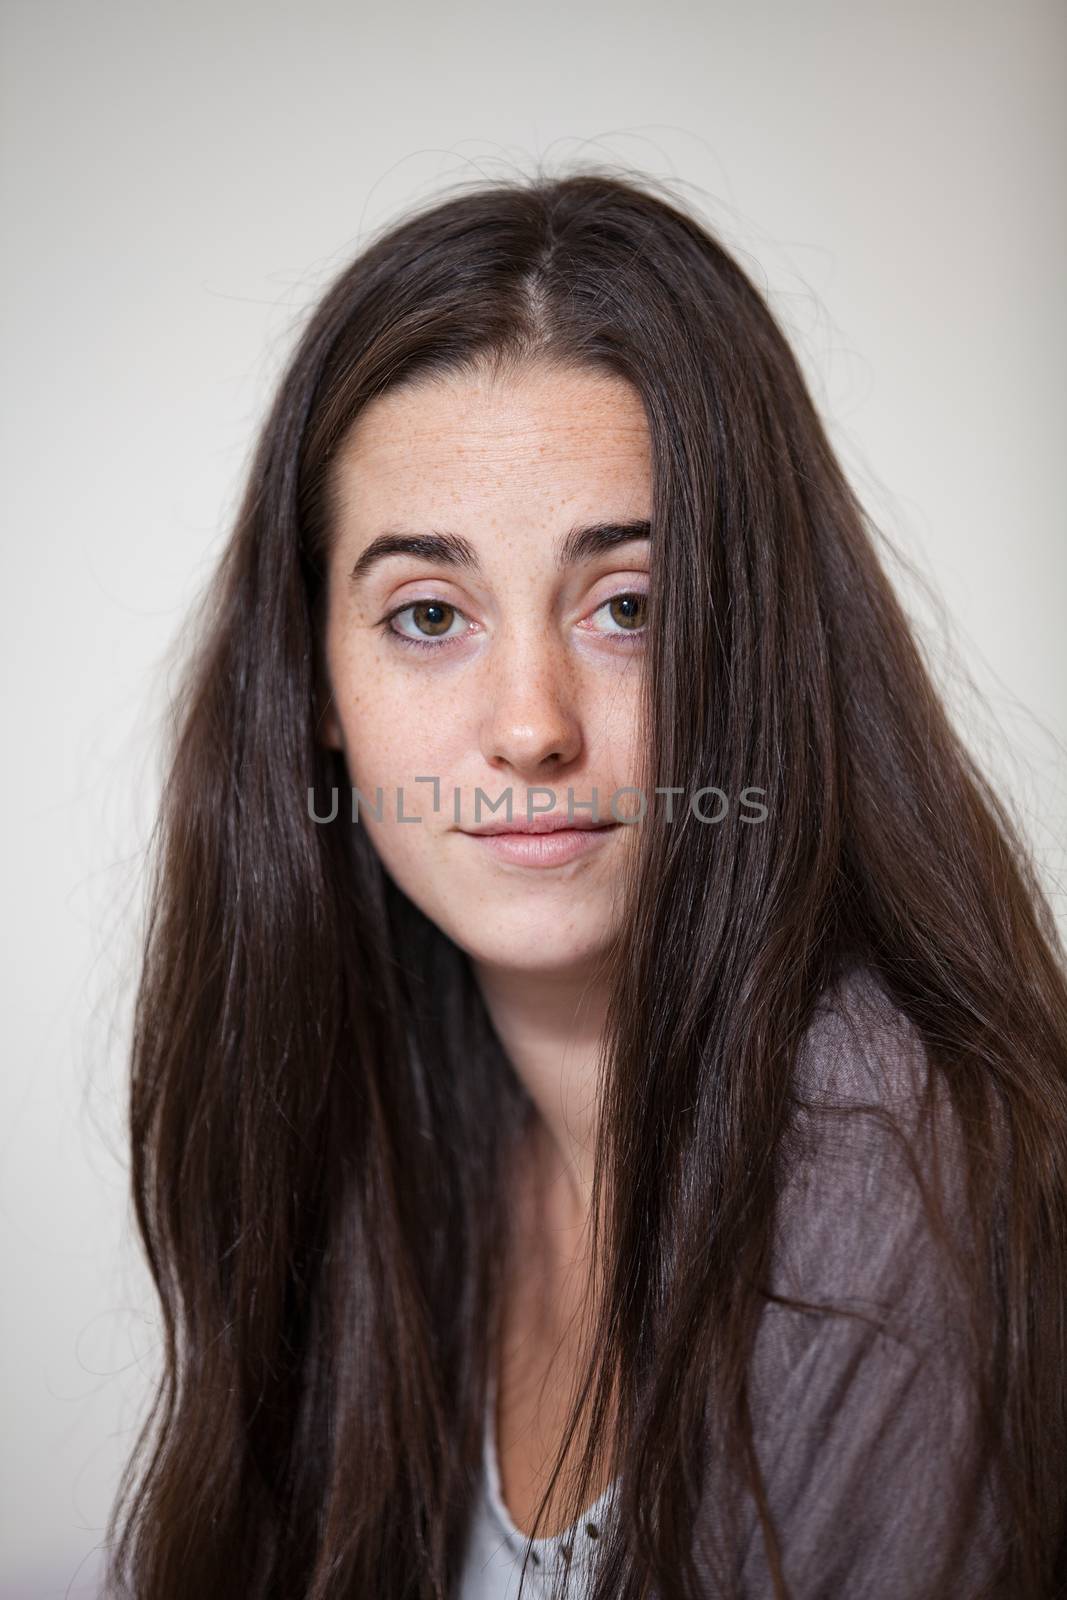 Portrait of a young and sweet natural woman without makeup with long brown hair